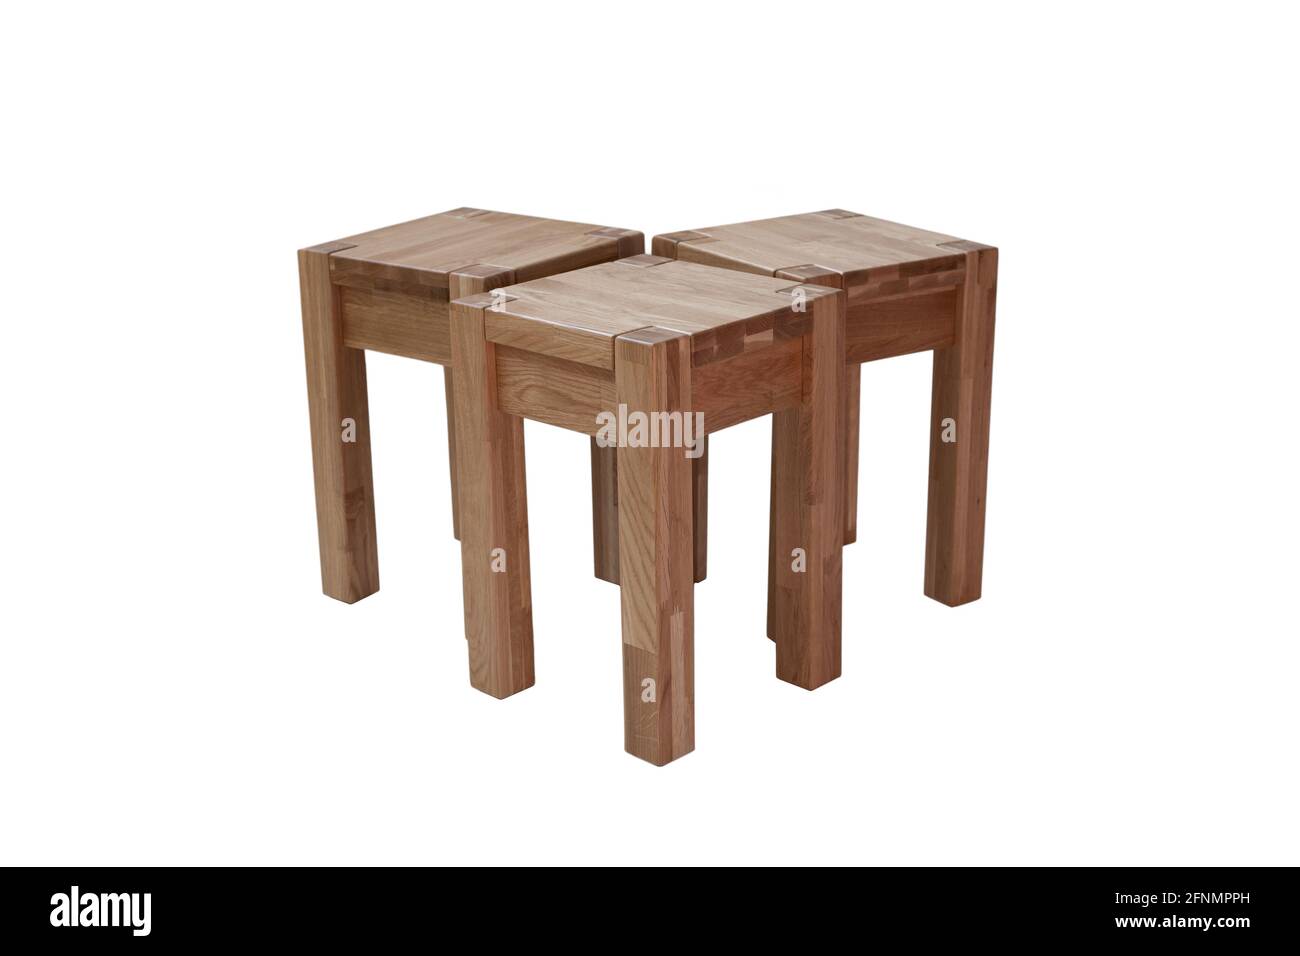 A set of three oak chairs. Kitchen chairs made of wood. Stock Photo